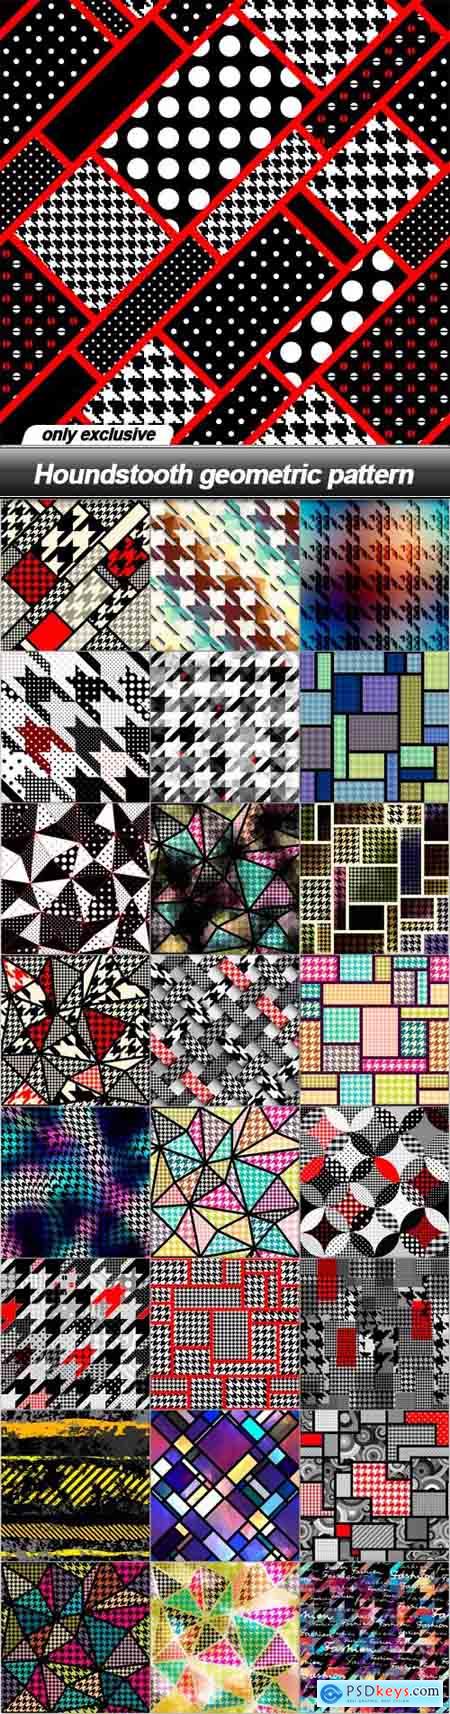 Houndstooth geometric pattern - 25 EPS